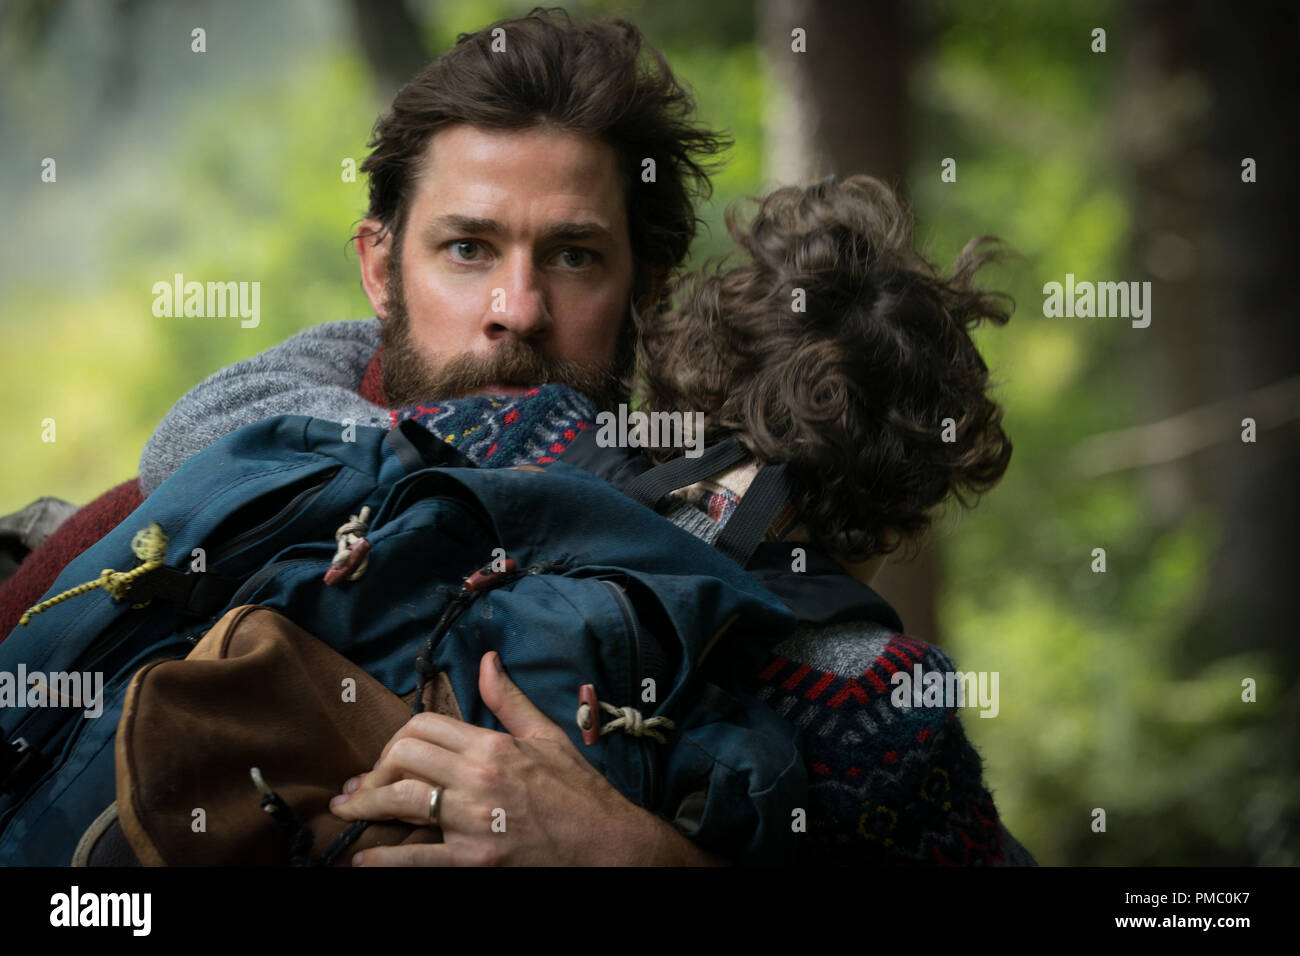 Left to right: John Krasinski plays Lee Abbott and Noah Jupe plays Marcus  Abbott in A QUIET PLACE, from Paramount Pictures. (2018) Paramount Pictures  Stock Photo - Alamy